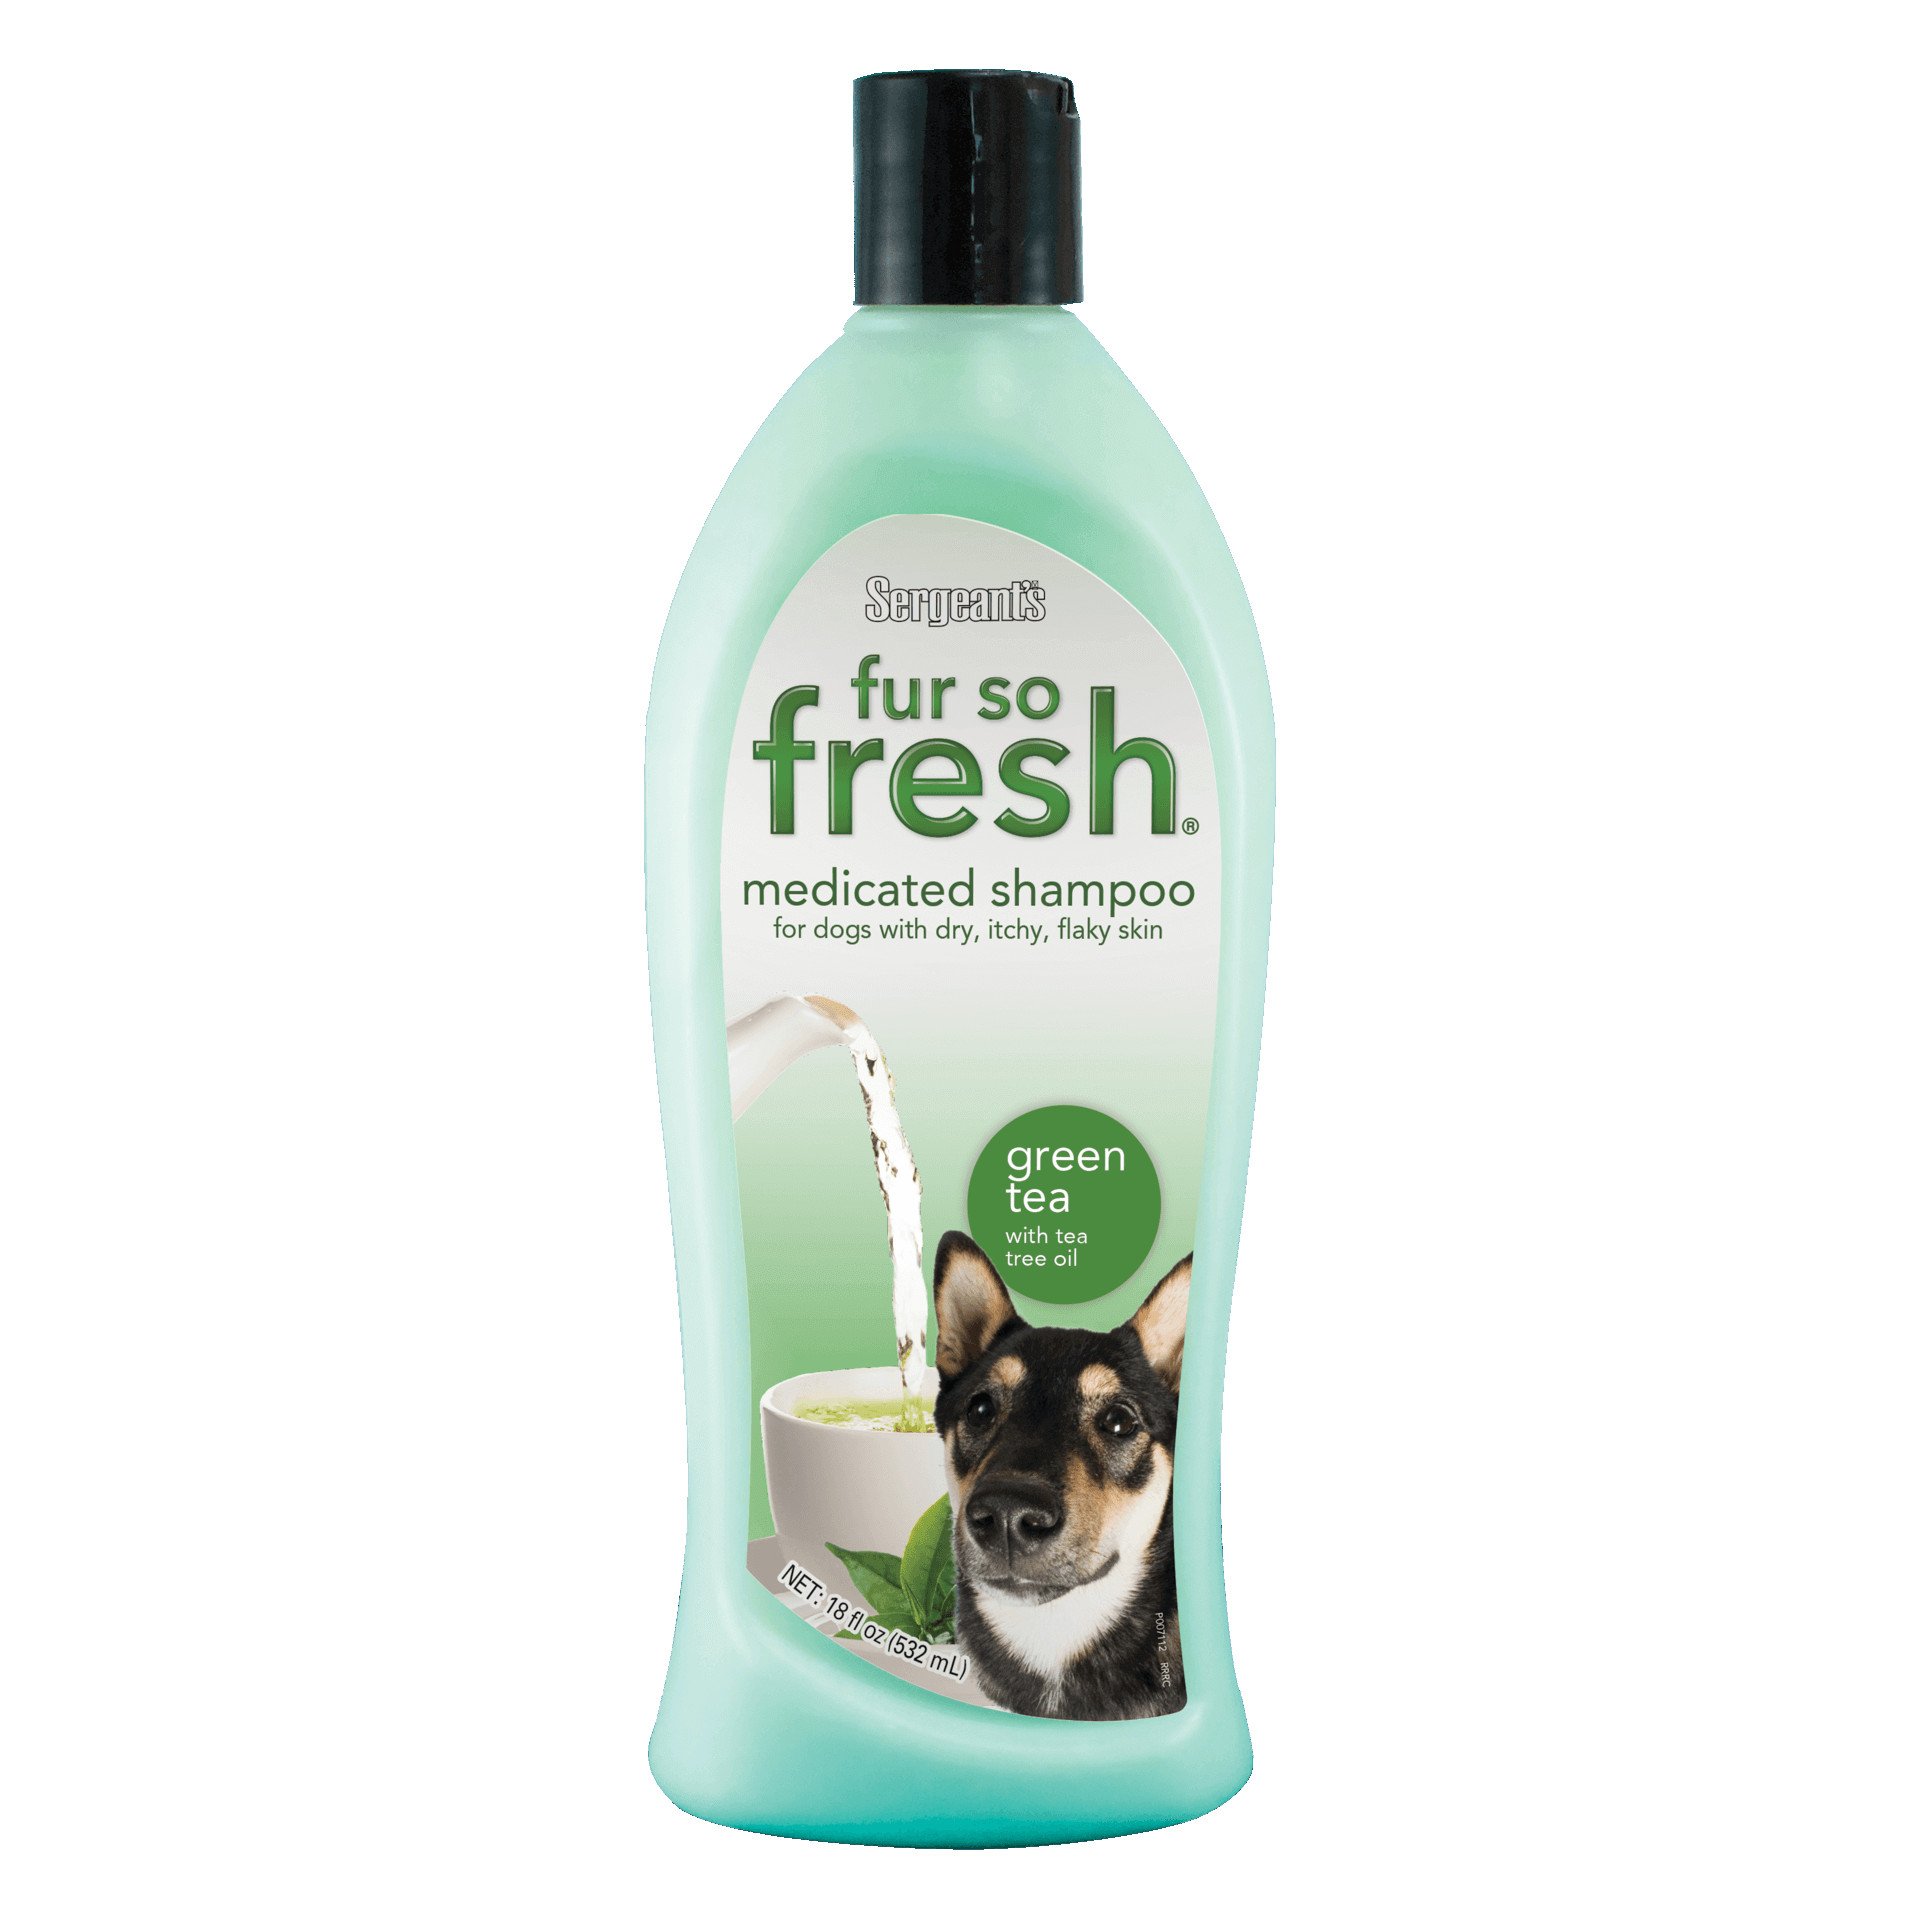 Sergeant's Fur So Fresh Medicated Shampoo for Dogs